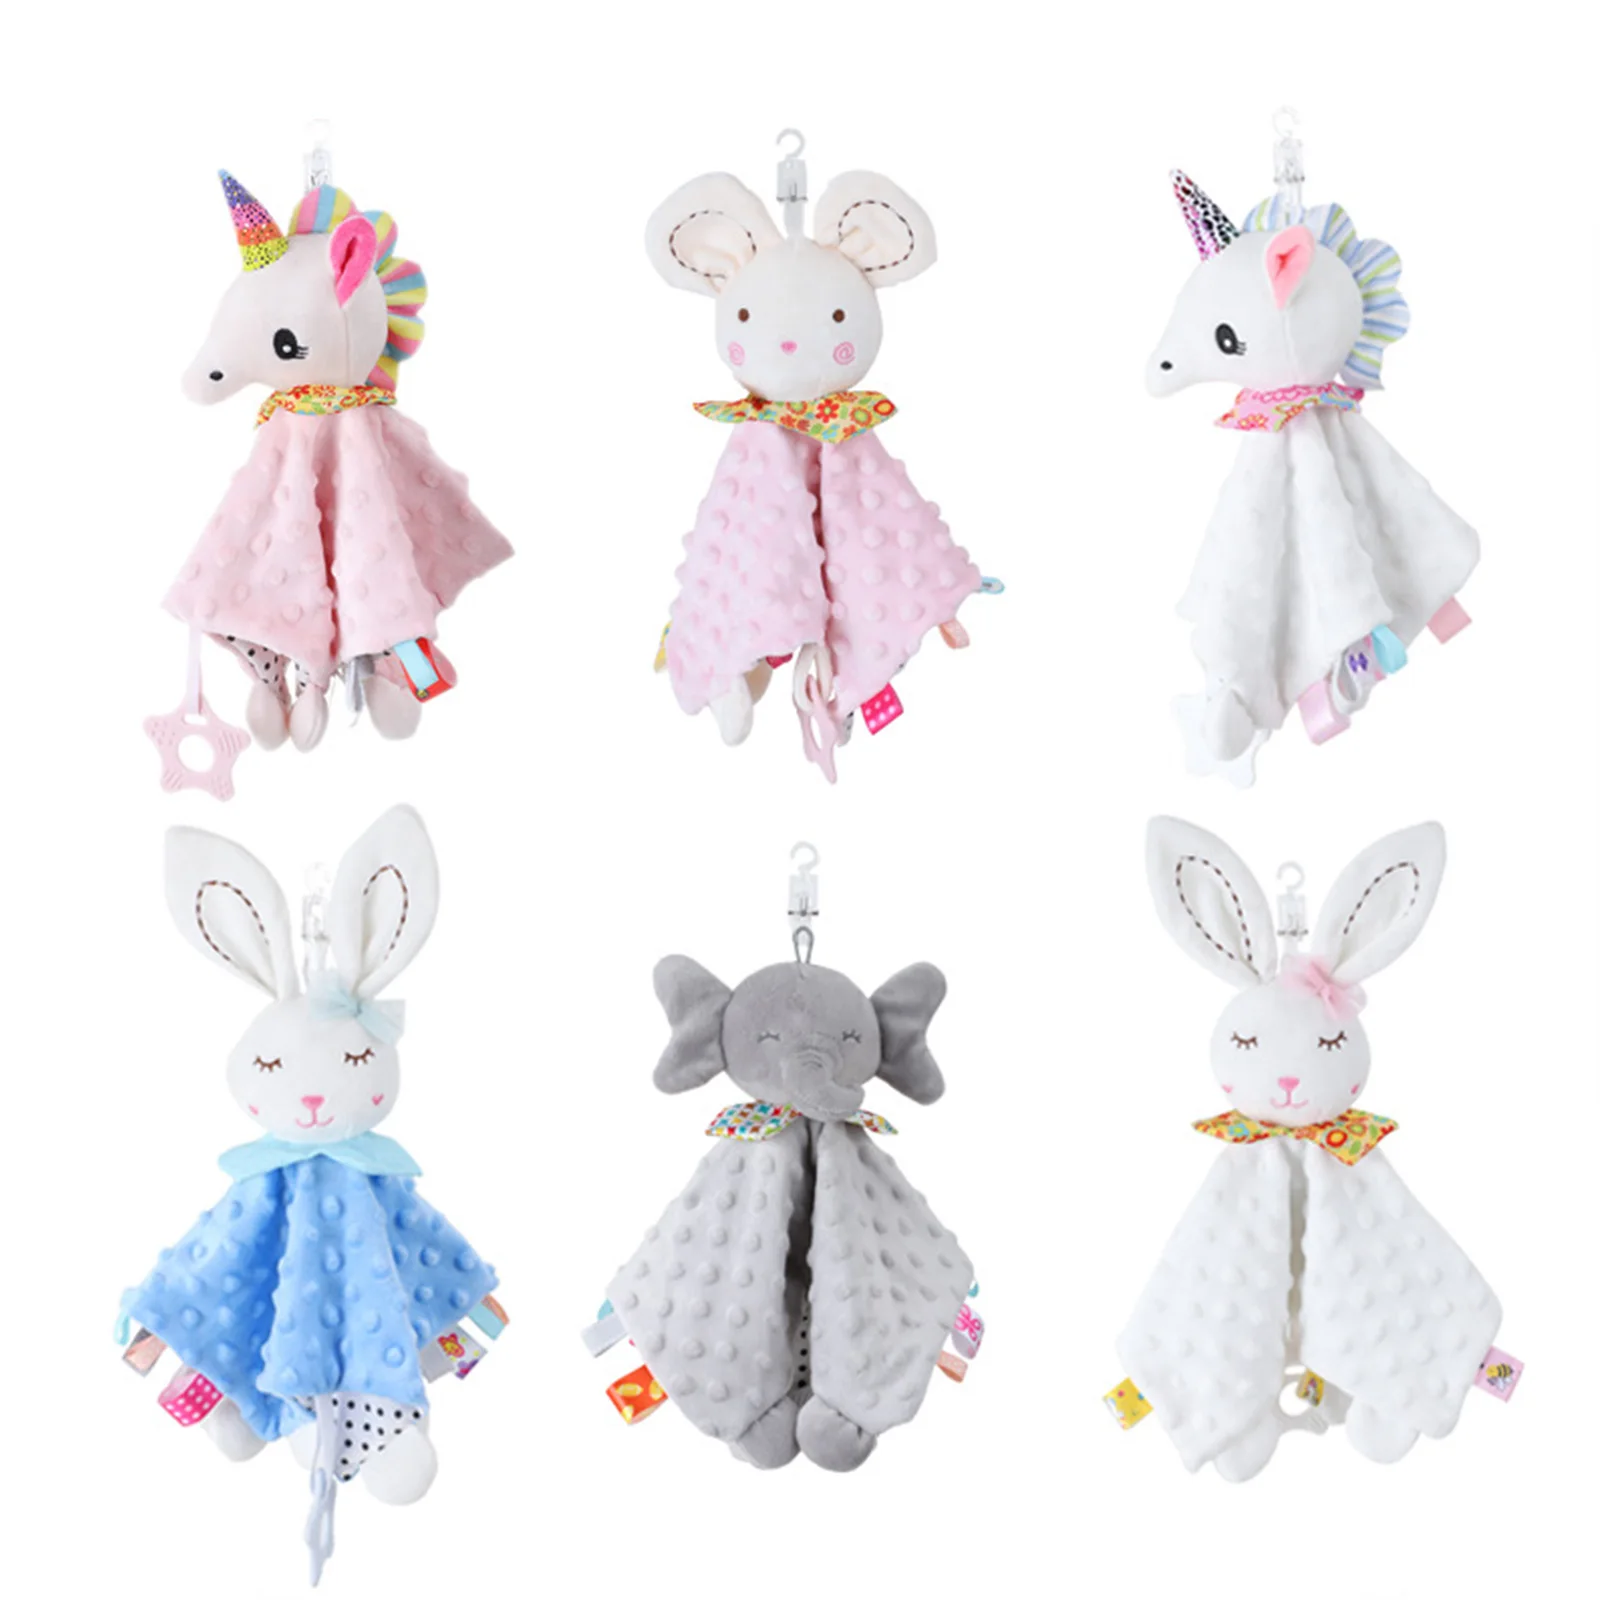 

Comforter Toys For Baby Newborns Sleeping Soothing Towel Cute Animal Plush Toys Rattle Baby Toys Companion Stuffed Toy Gift